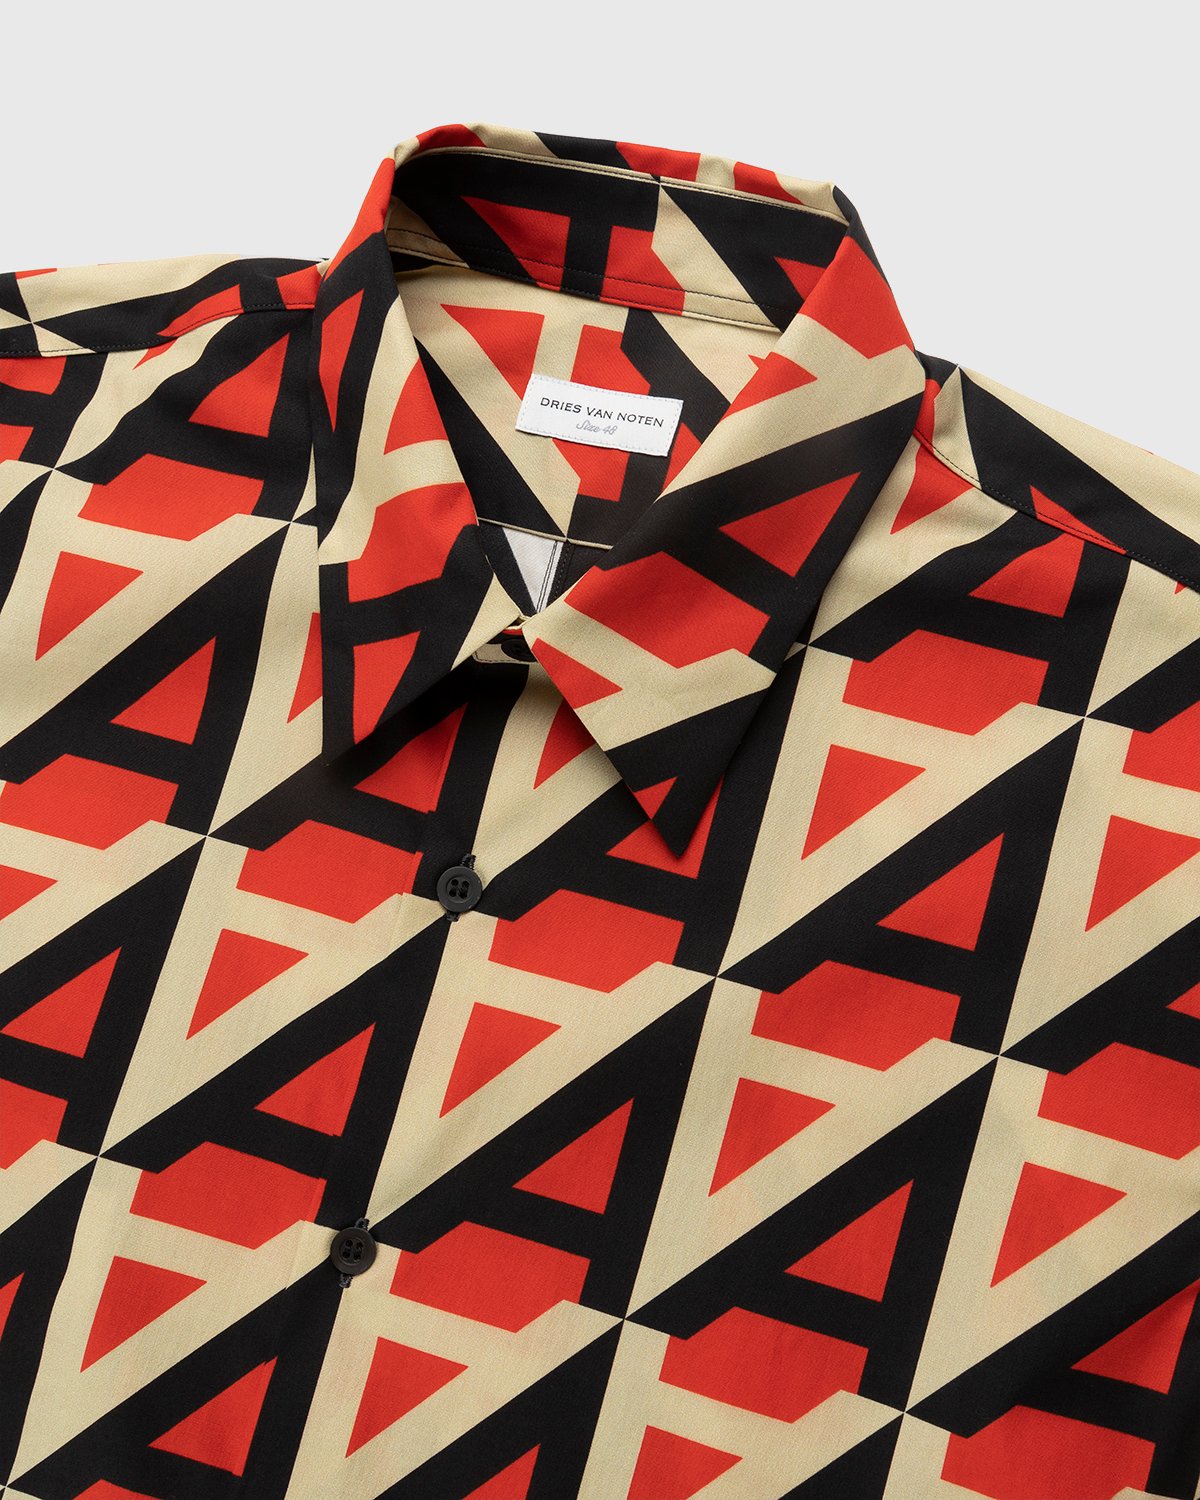 Dries van Noten - Curle "A" Shirt Red - Clothing - Red - Image 4